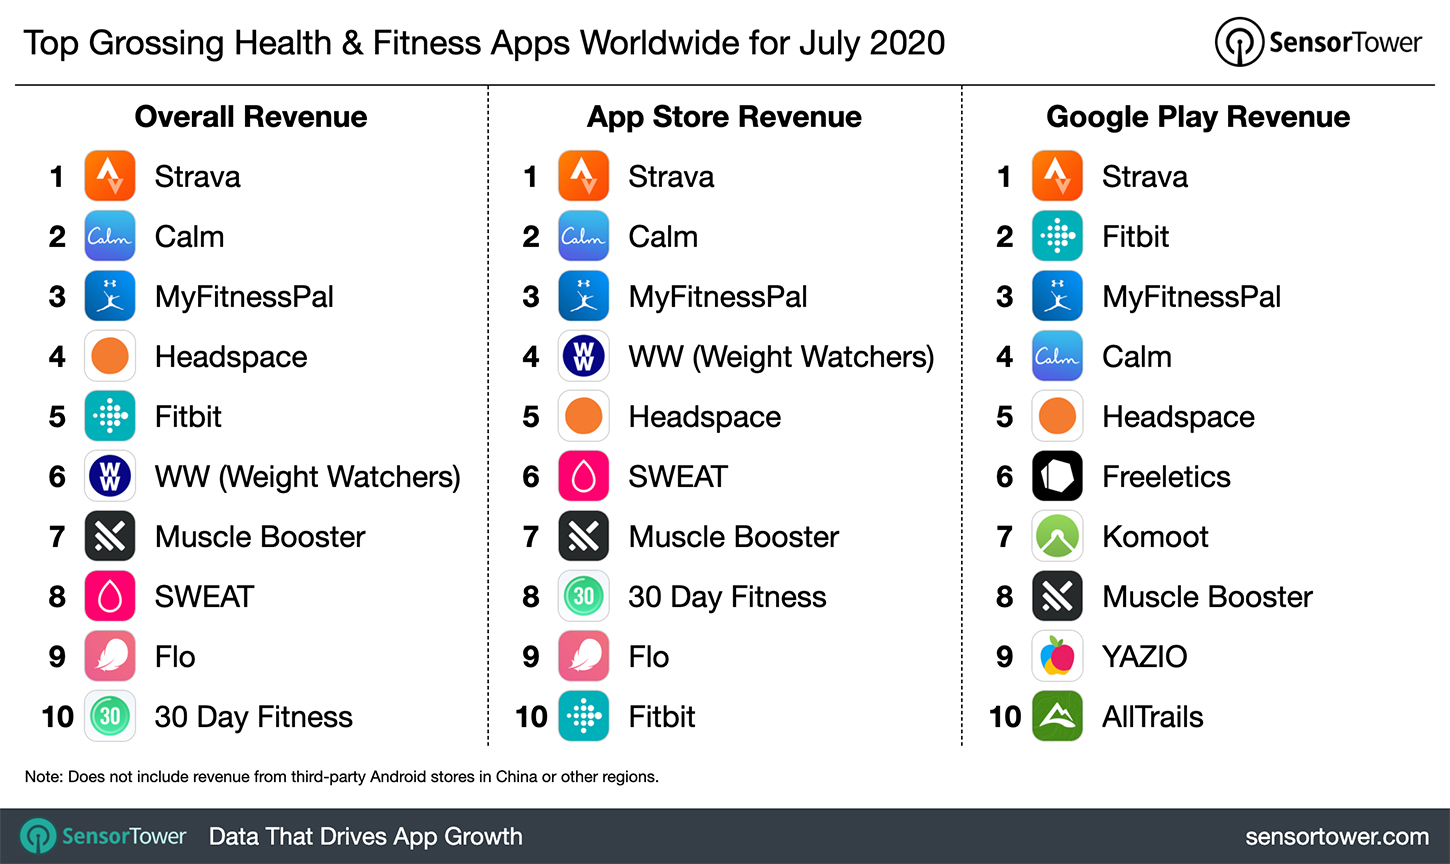 “Top Grossing Health & Fitness category Apps Worldwide for July 2020